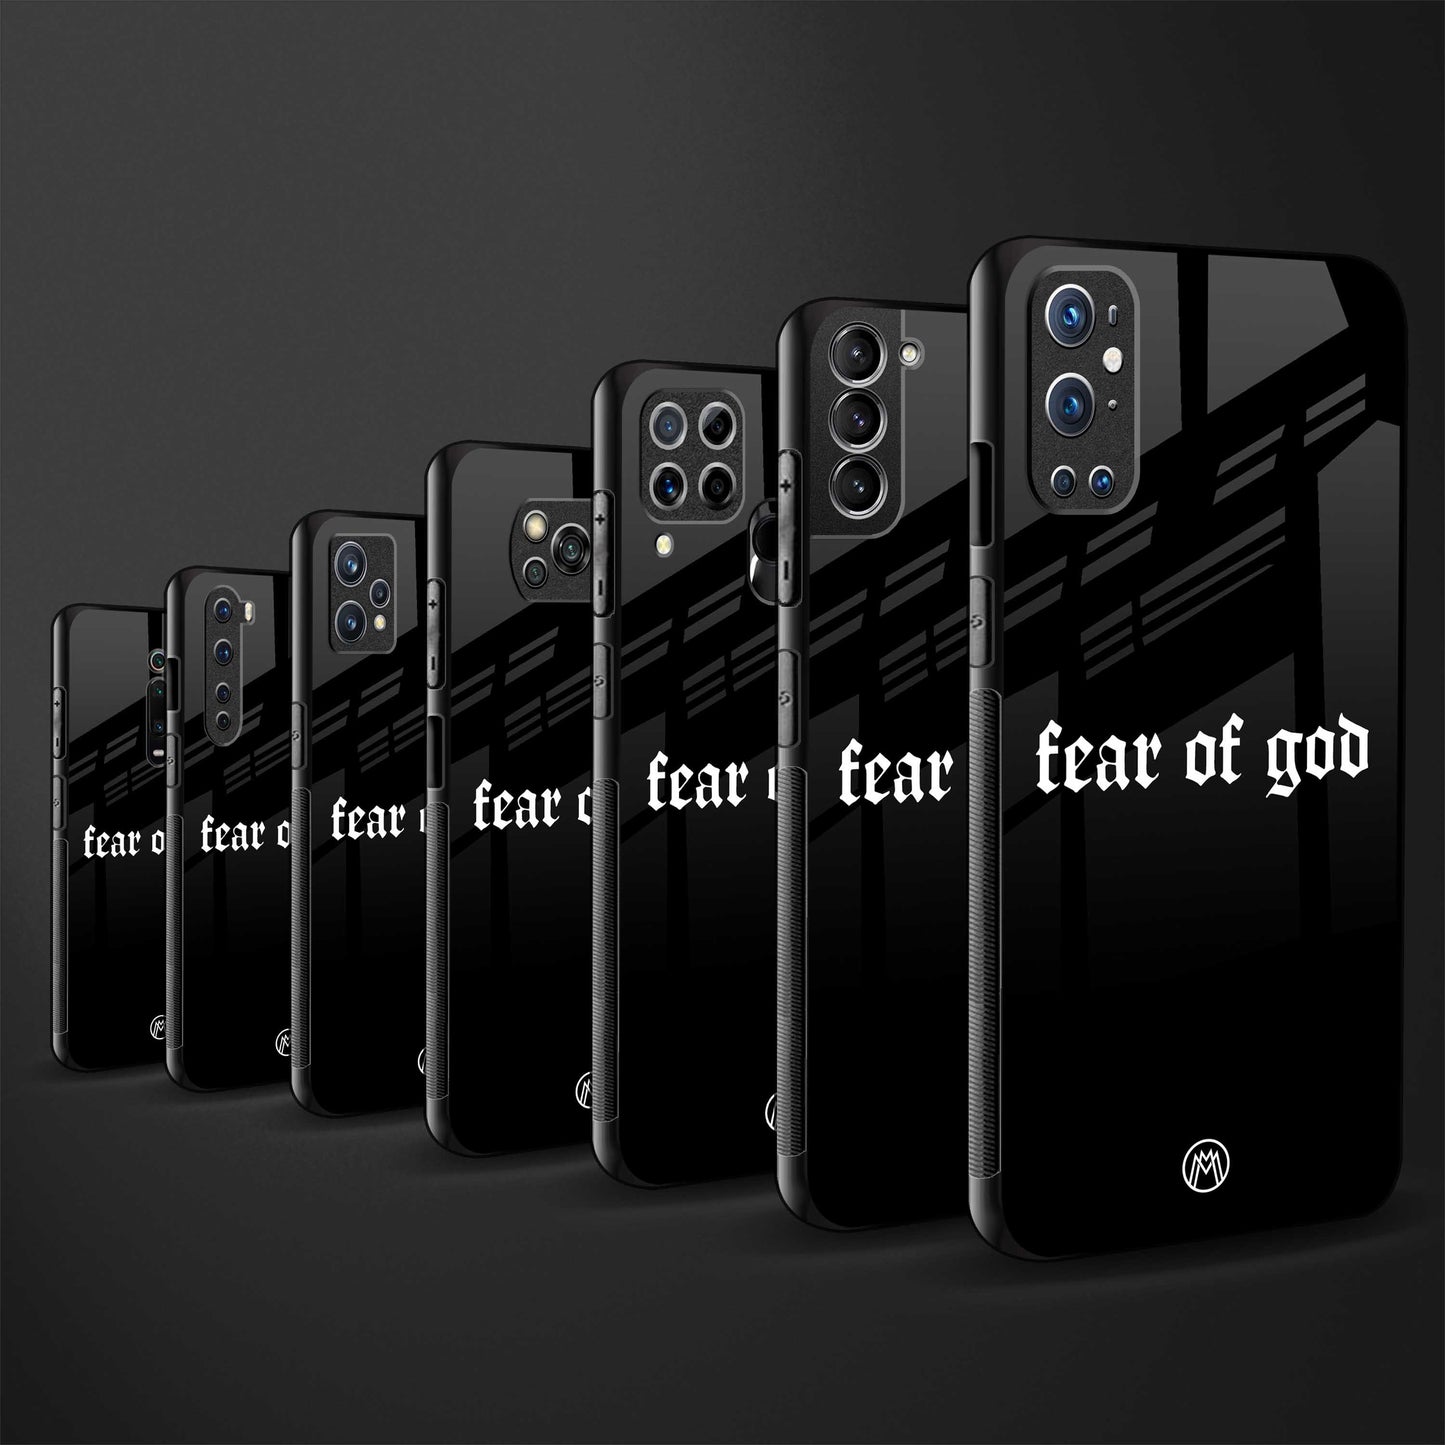 fear of god phone cover for iphone 13